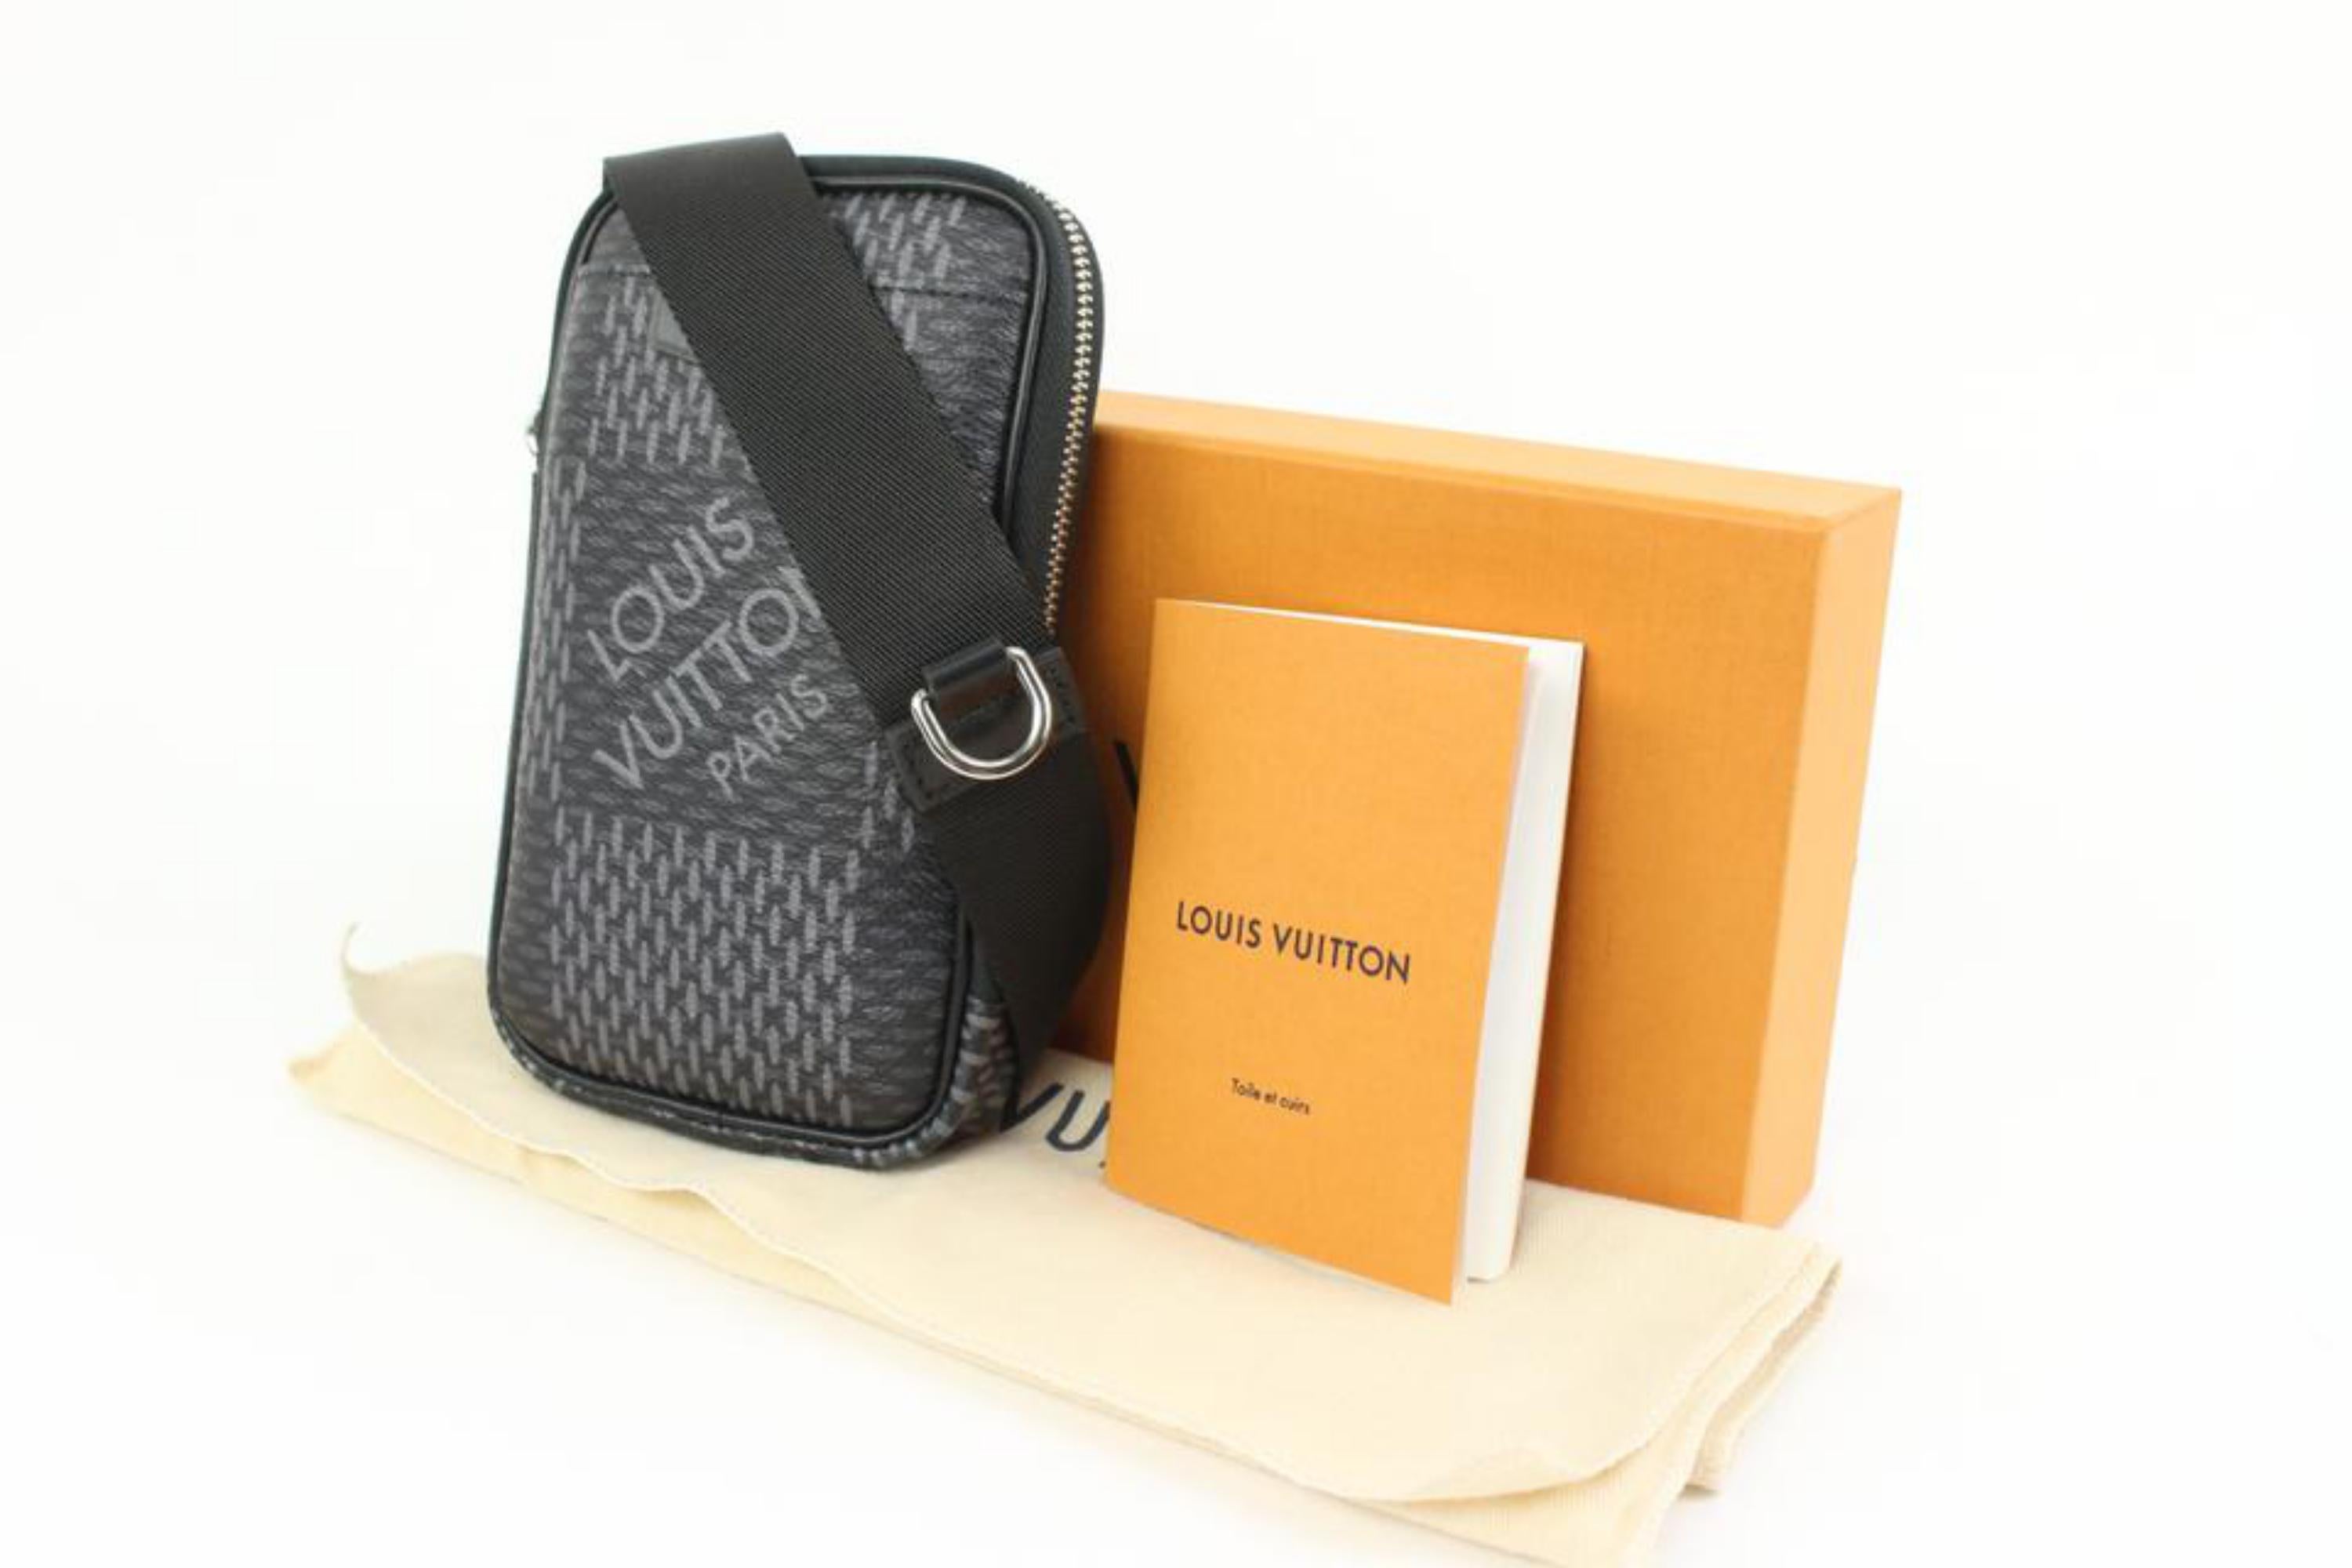 Louis Vuitton Damier Graphite Giant Modular Pouch Crossbody 27lk321s
Date Code/Serial Number: SP3280
Made In: France
Measurements: Length:  4